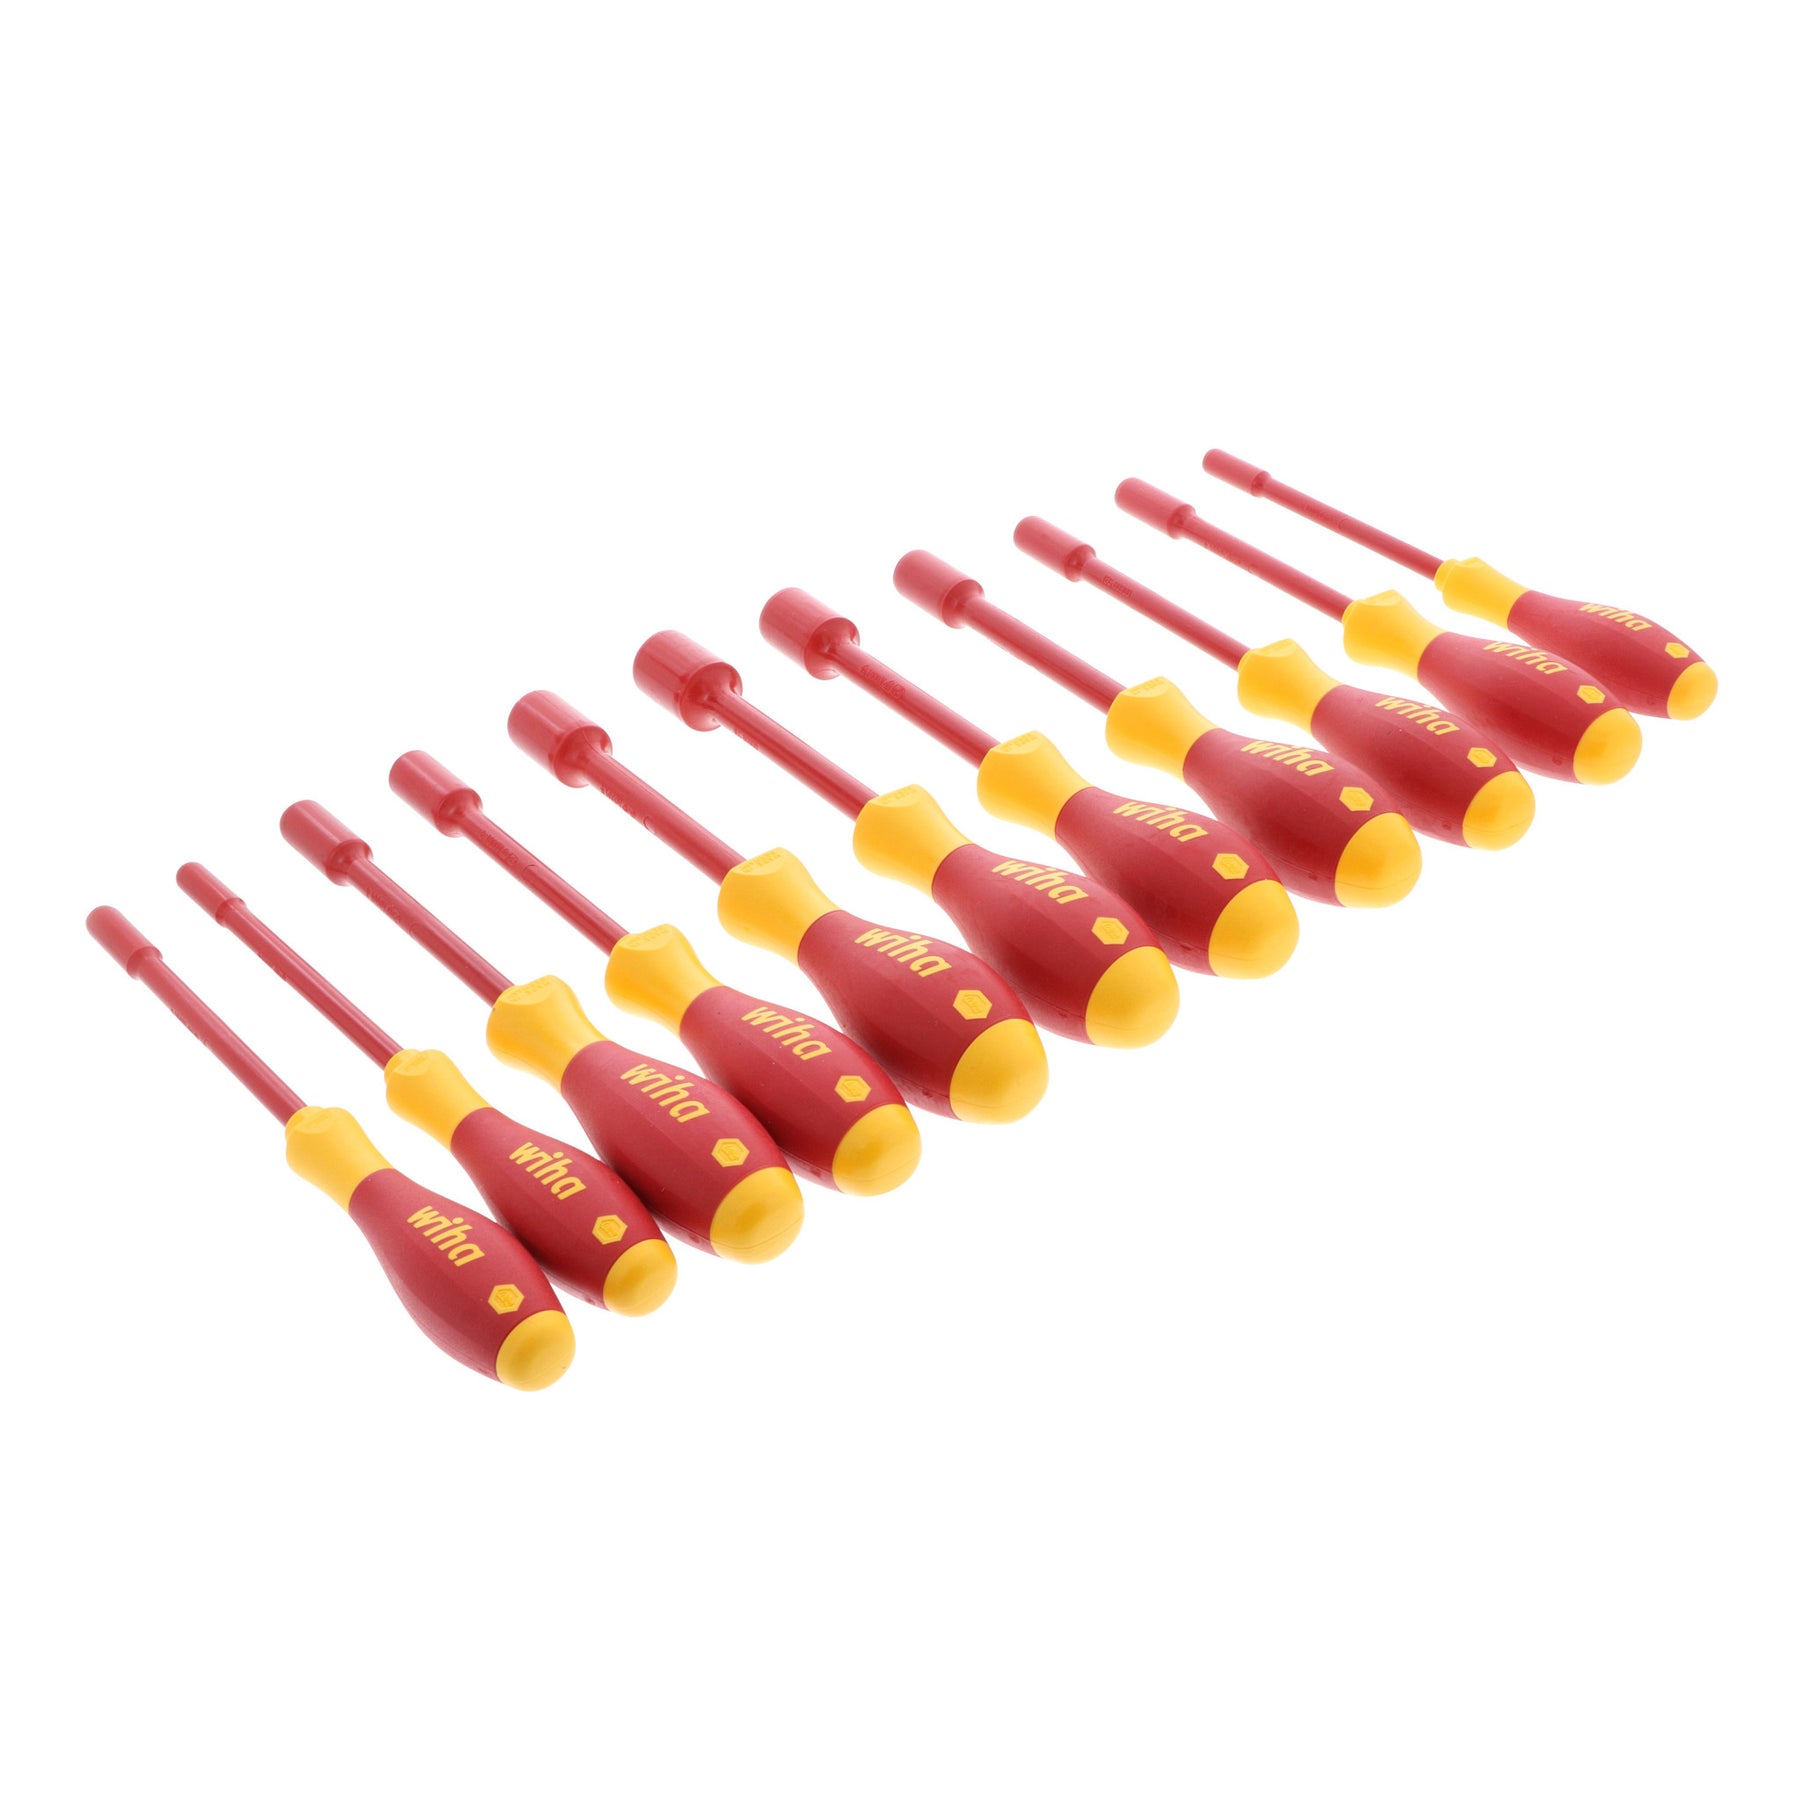 11 Piece Insulated SoftFinish Nut Driver Set - Inch